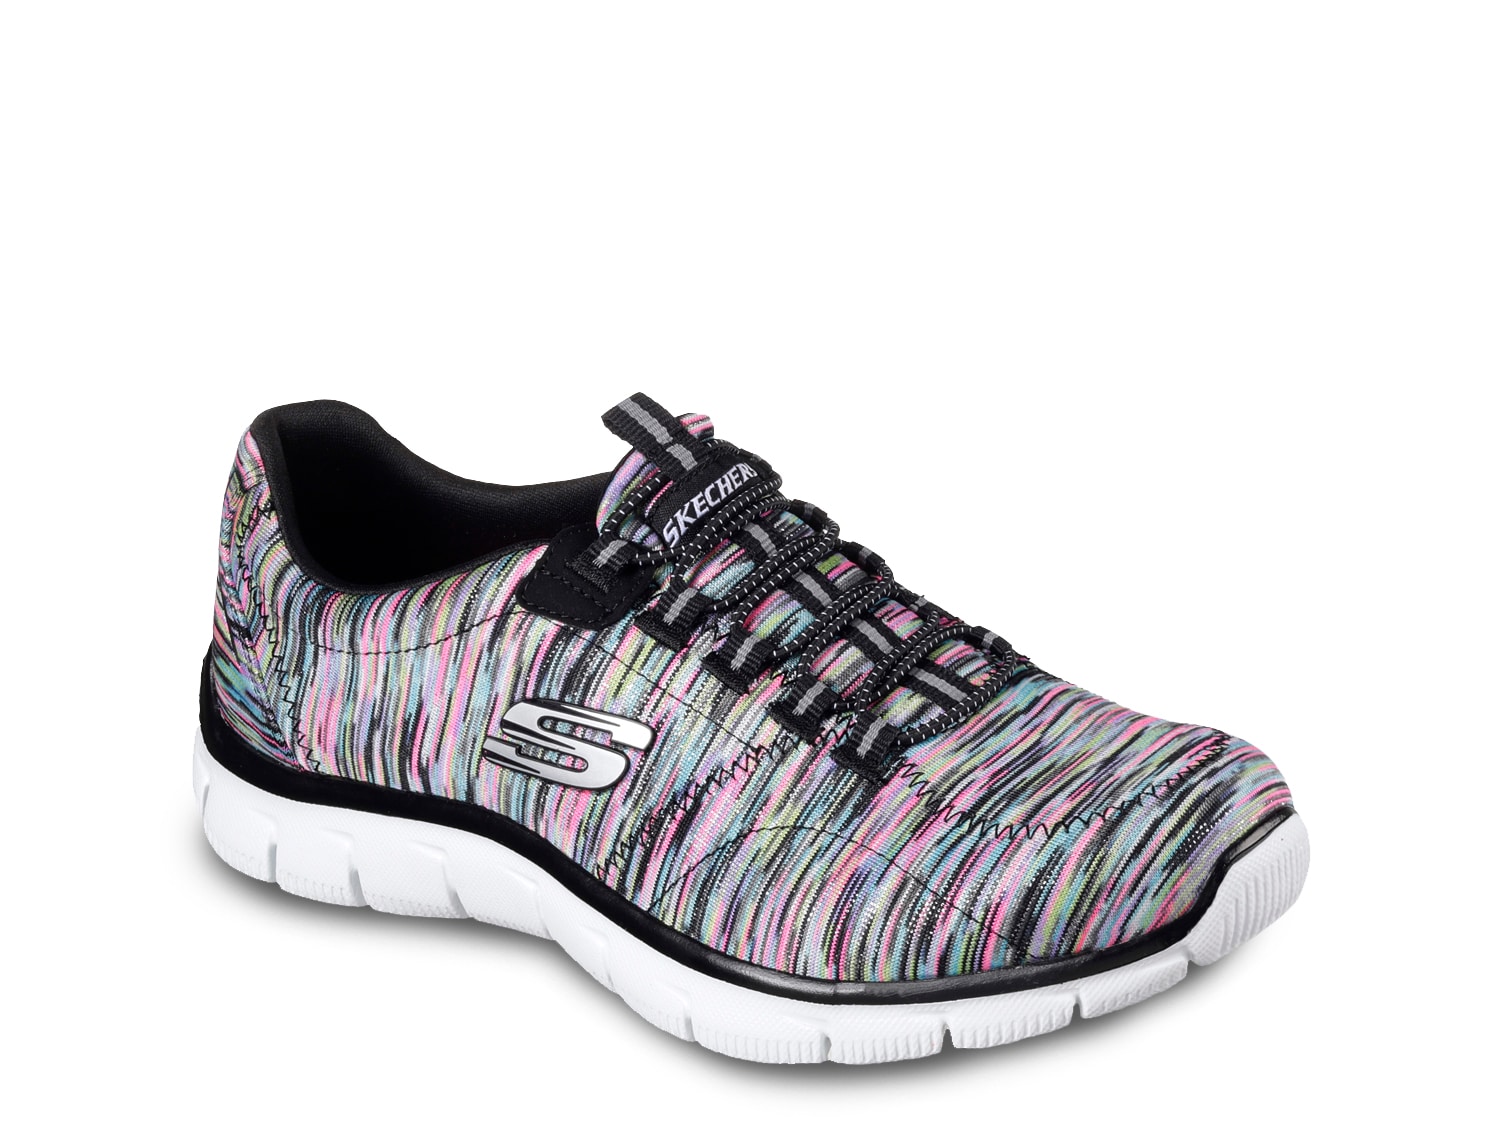 Skechers Relaxed Fit Empire Game On Slip-On Sneaker - Women's - Free Shipping DSW